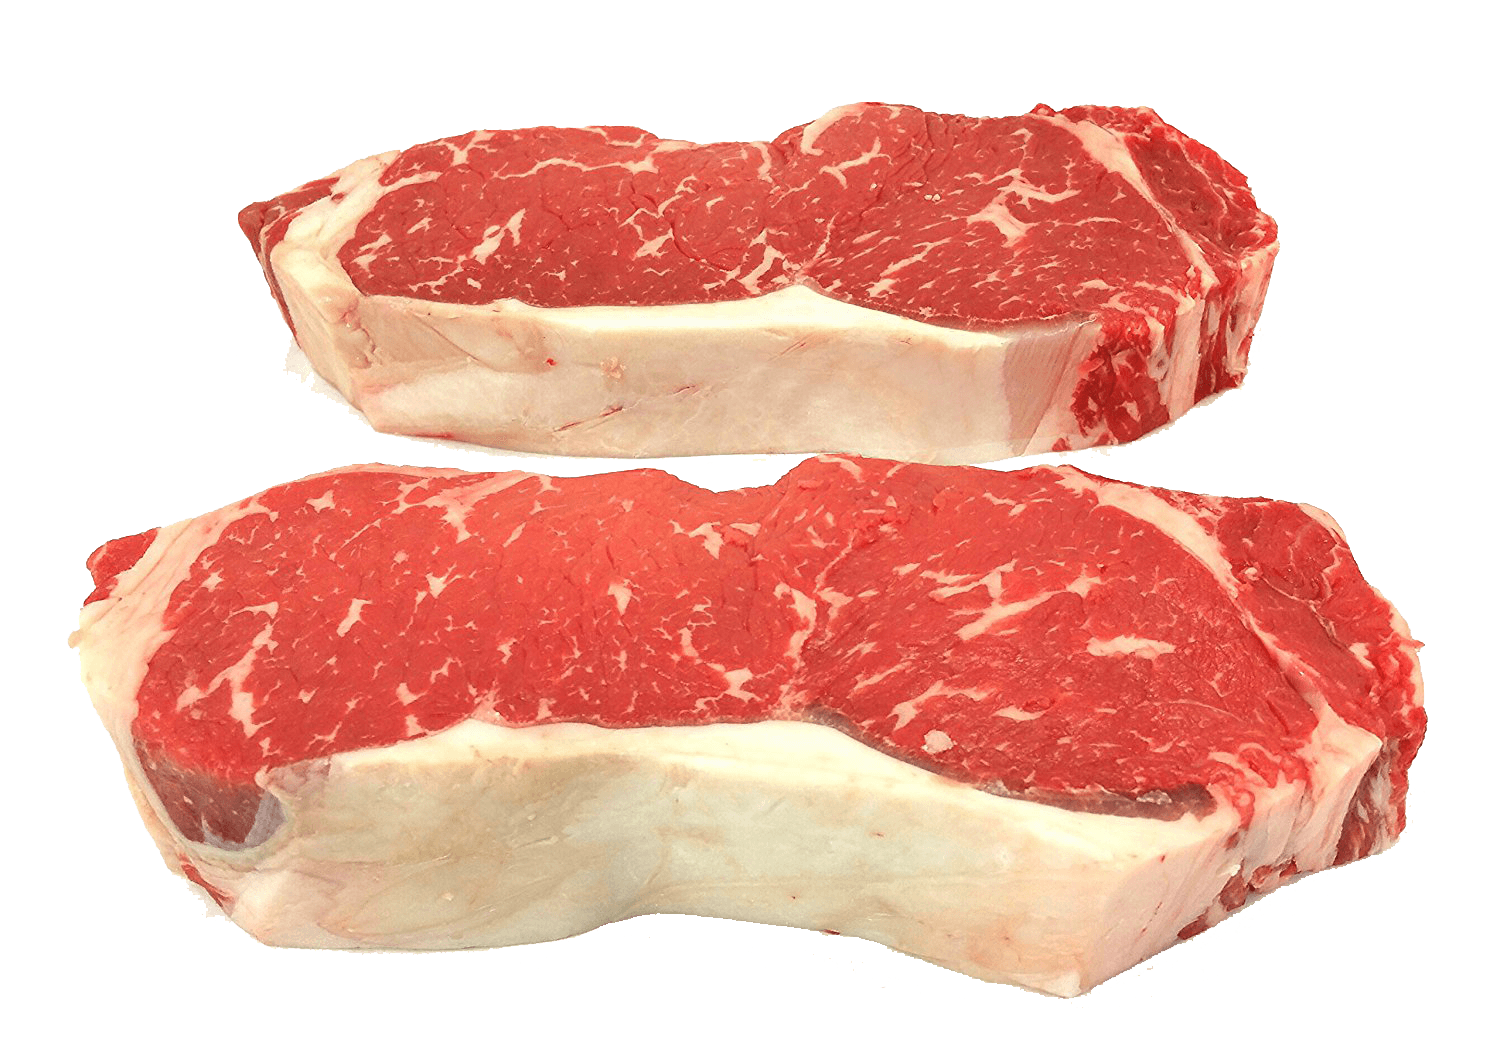 Fresh Local Meat Delivery - New York Strip Steak Angus Beef Cut Fresh Daily (2 Steaks 1.25 Pounds) Chef's Choice